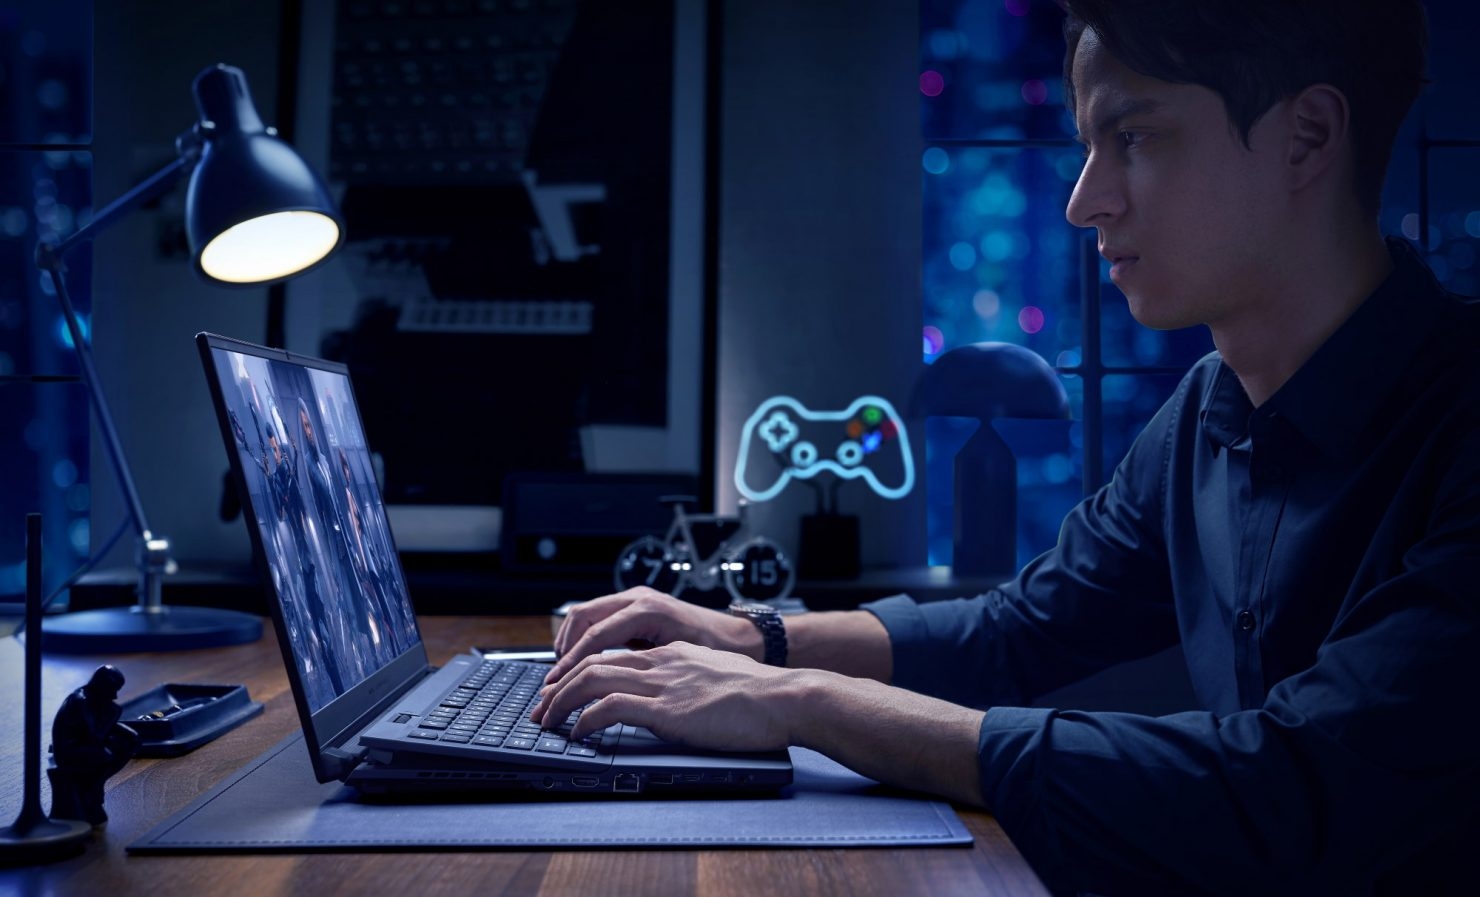 Where To Sell Gaming Laptop
